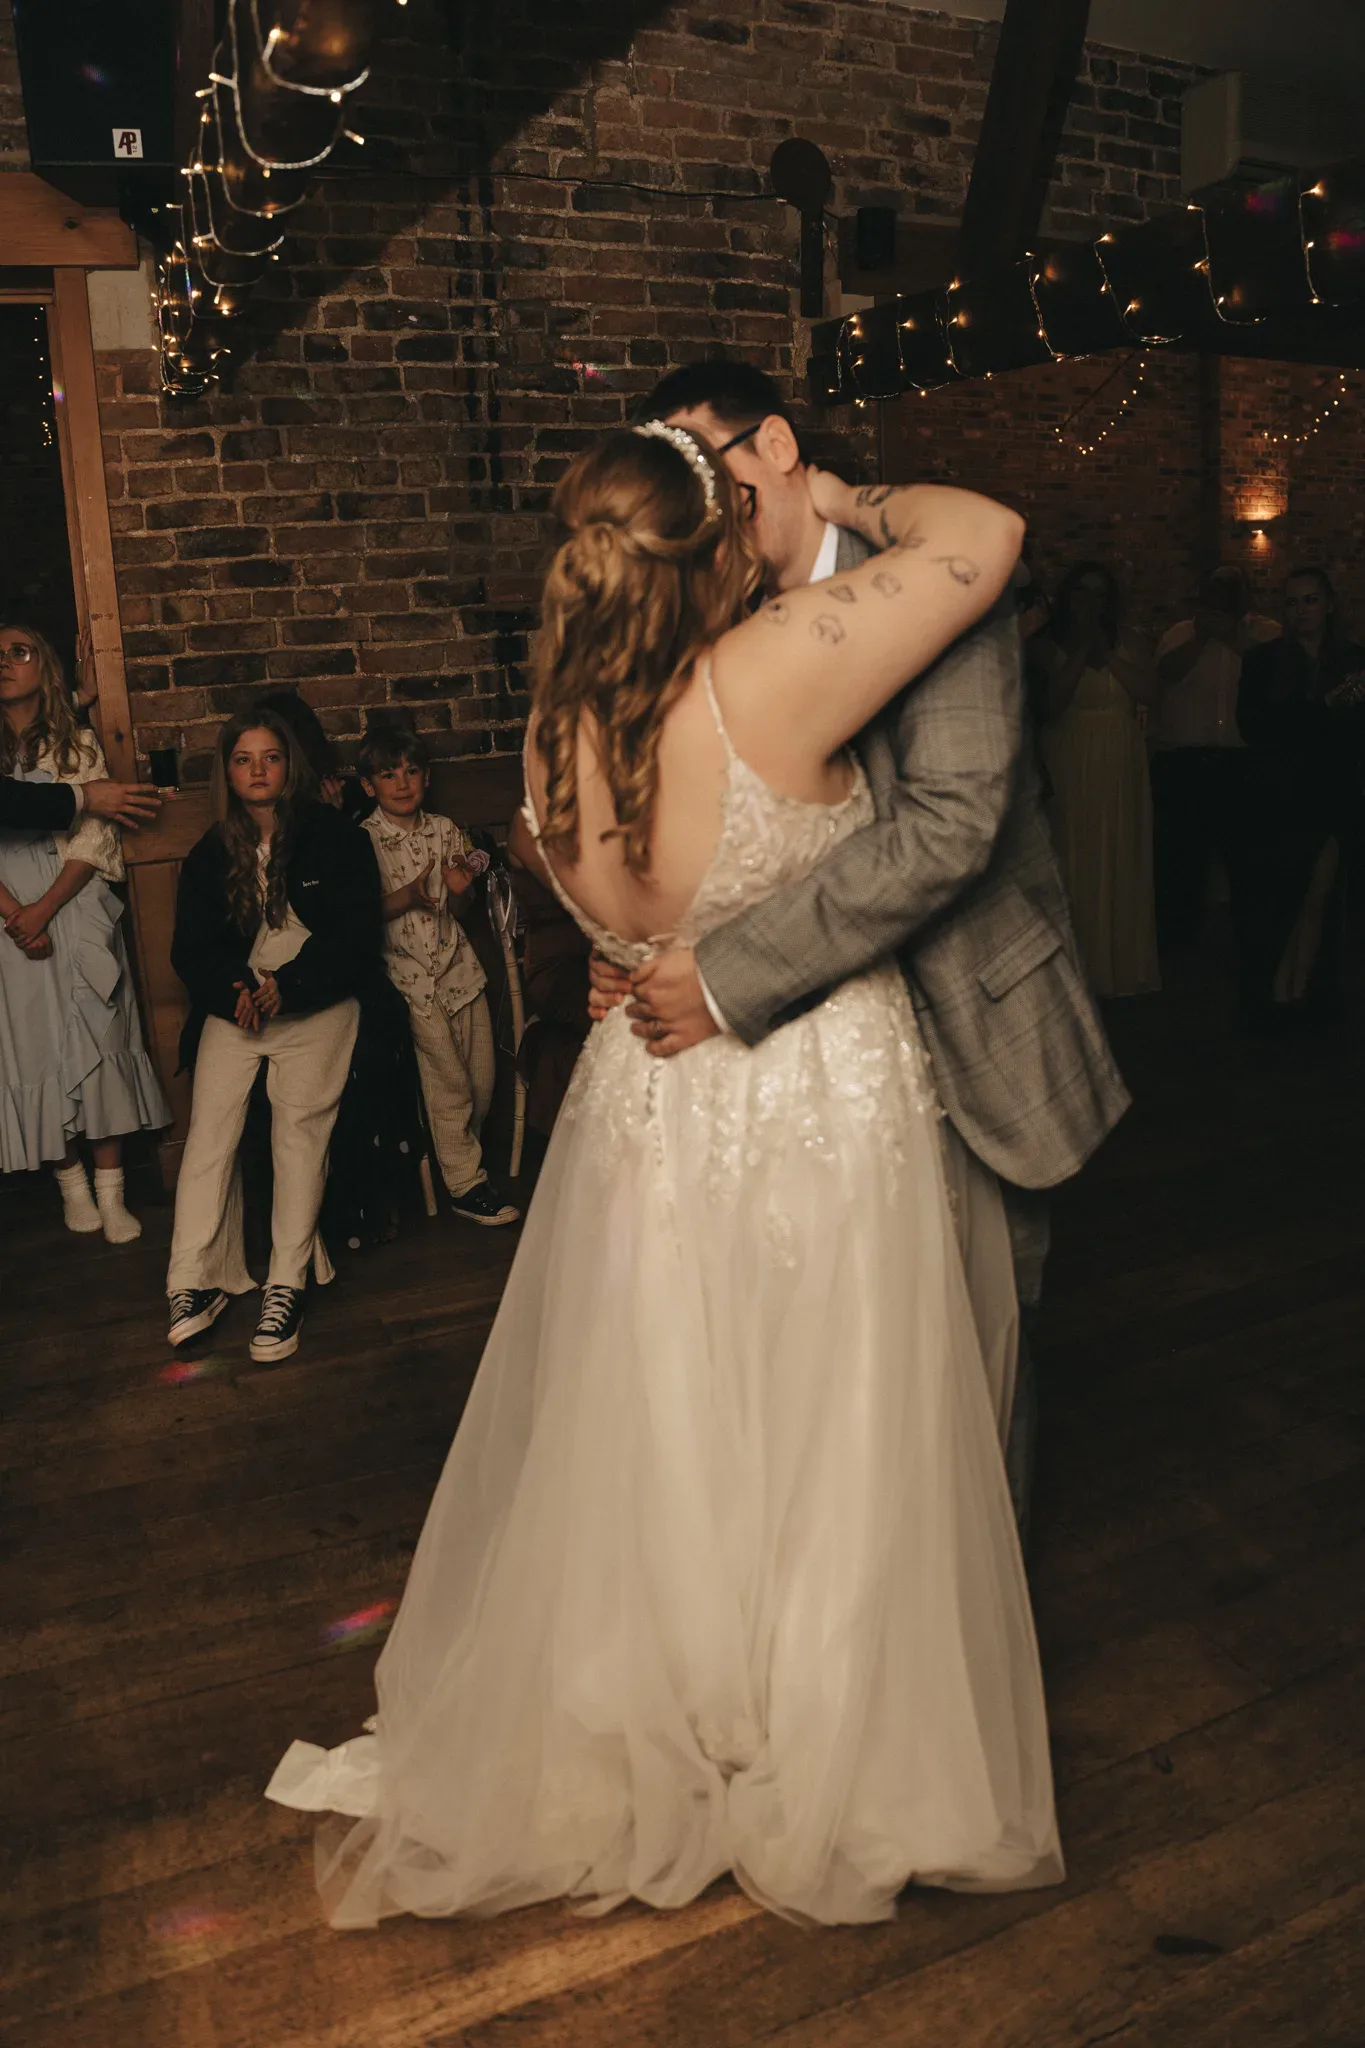 A couple shares their first dance as newlyweds, immersed in a heartfelt moment amidst guests in a warmly-lit rustic venue with exposed brick walls, creating a memory to cherish.